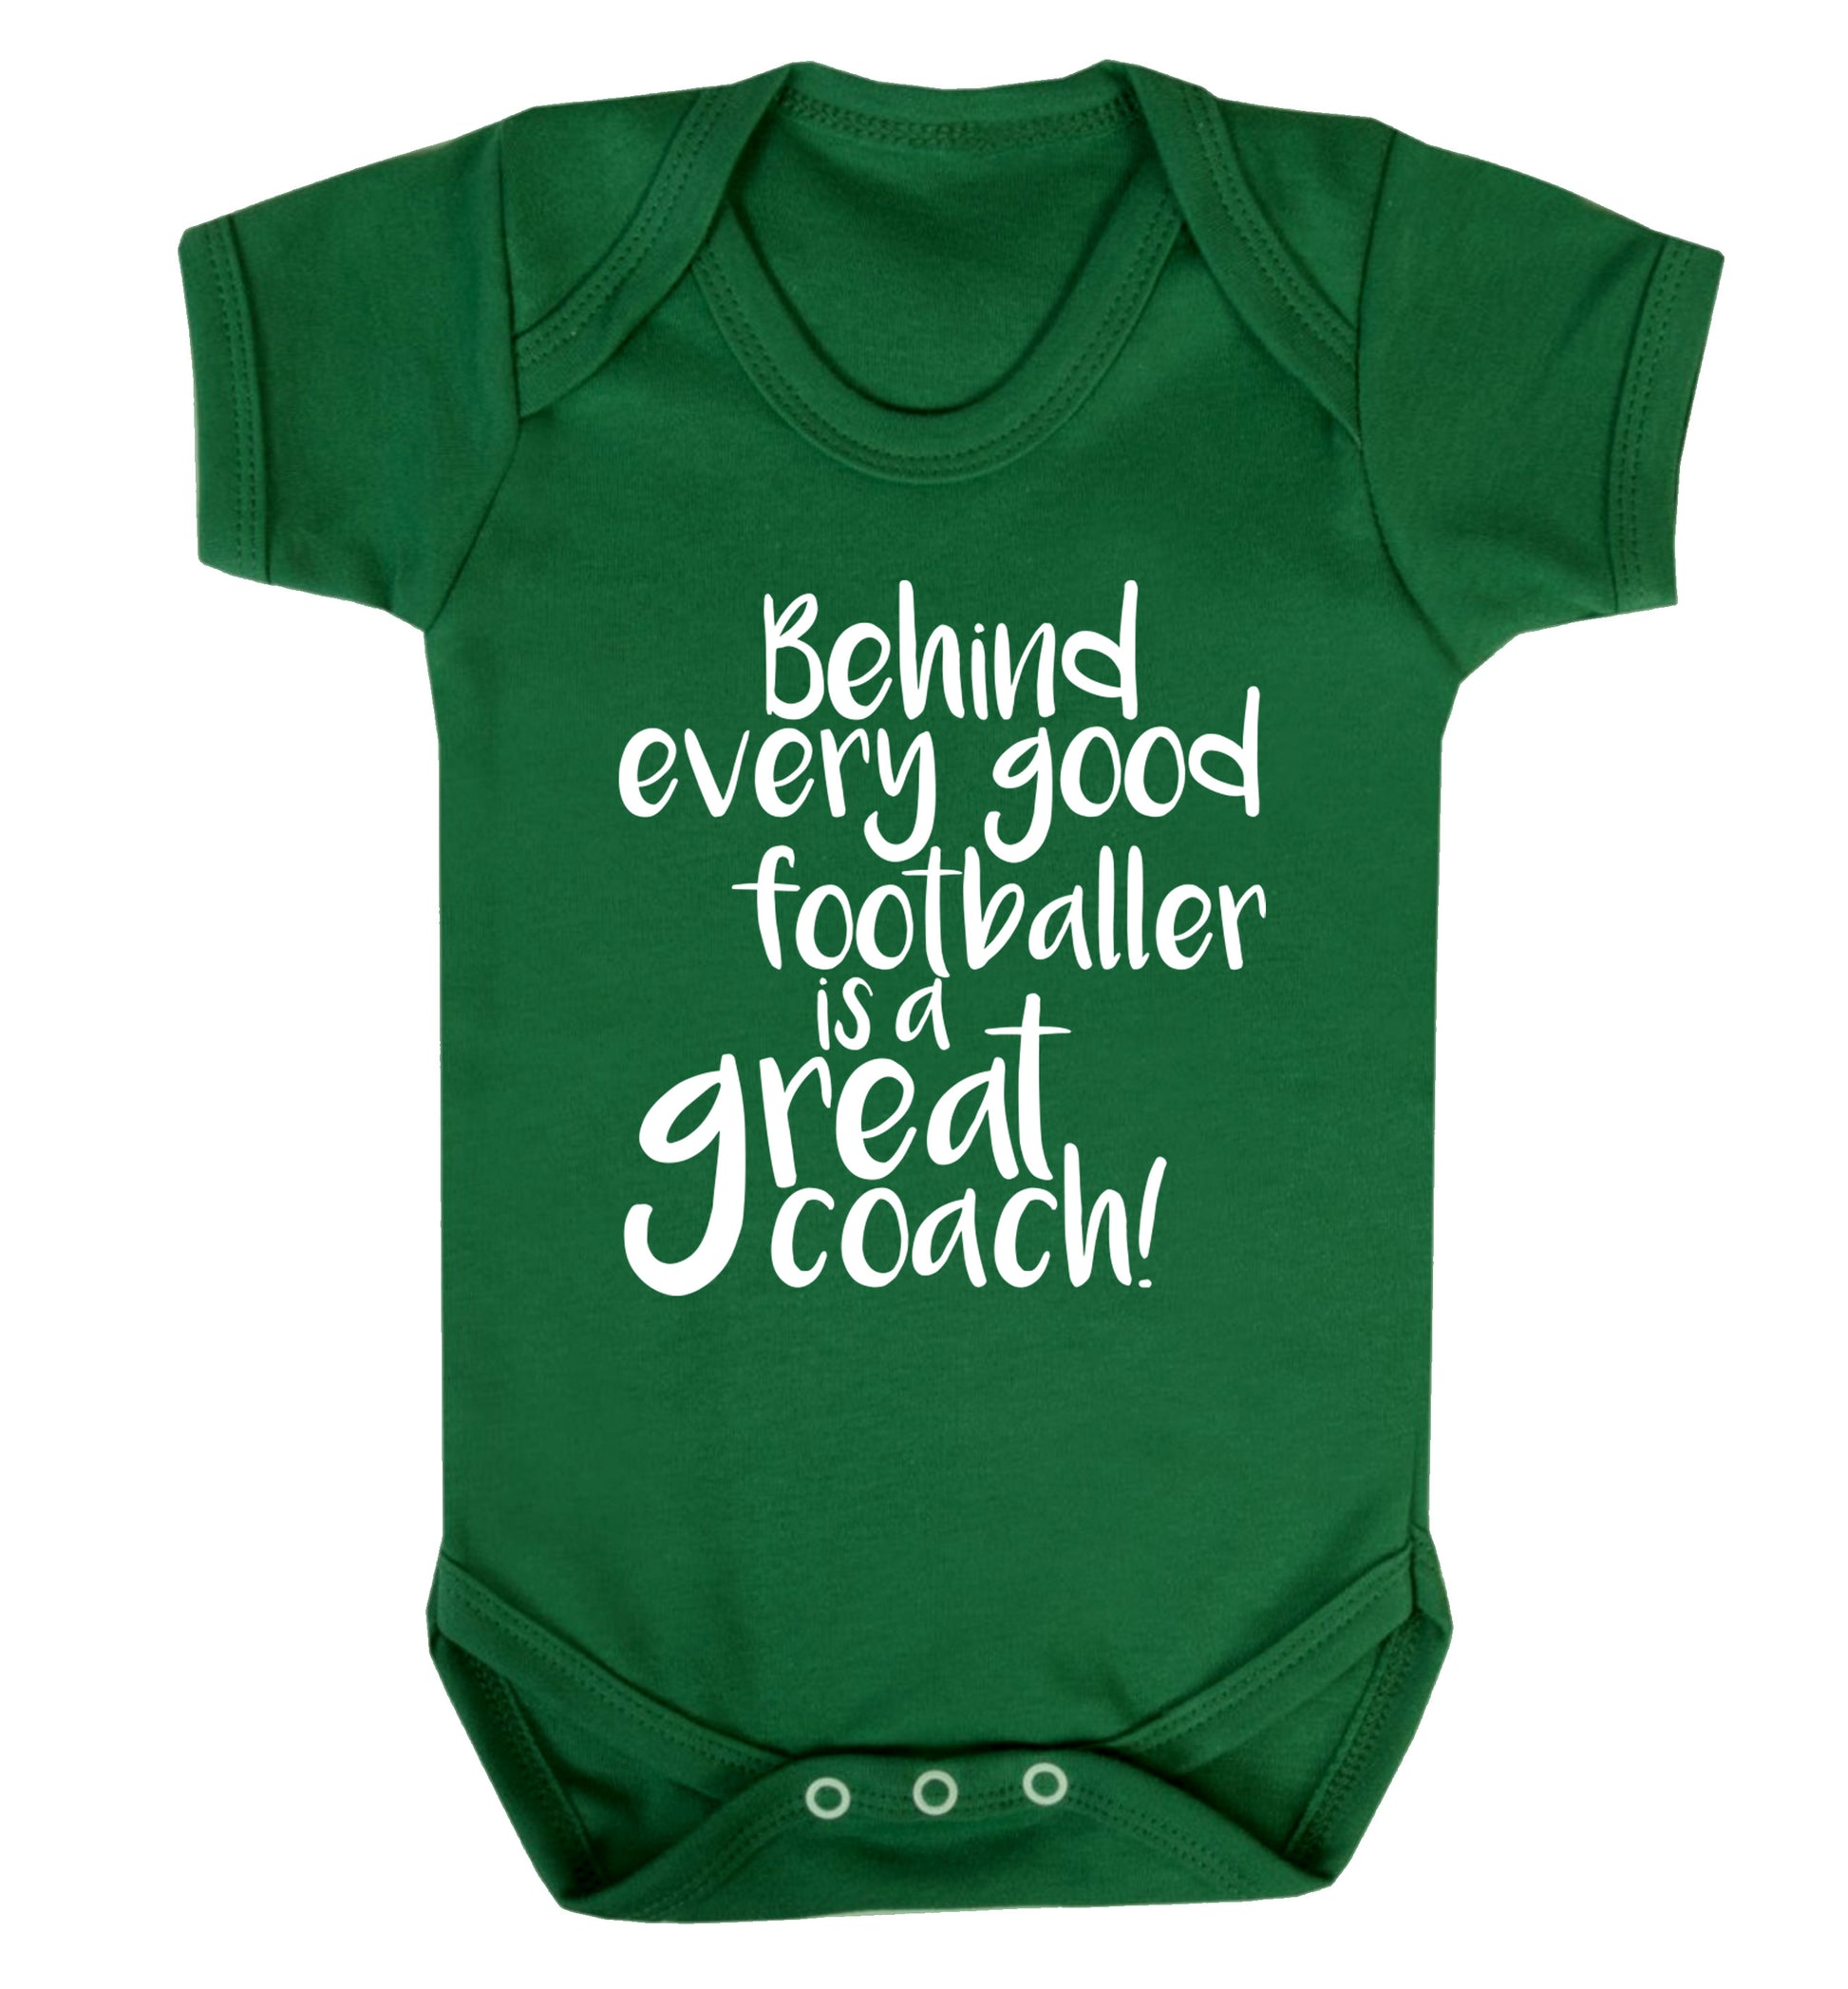 Behind every good footballer is a great coach! Baby Vest green 18-24 months